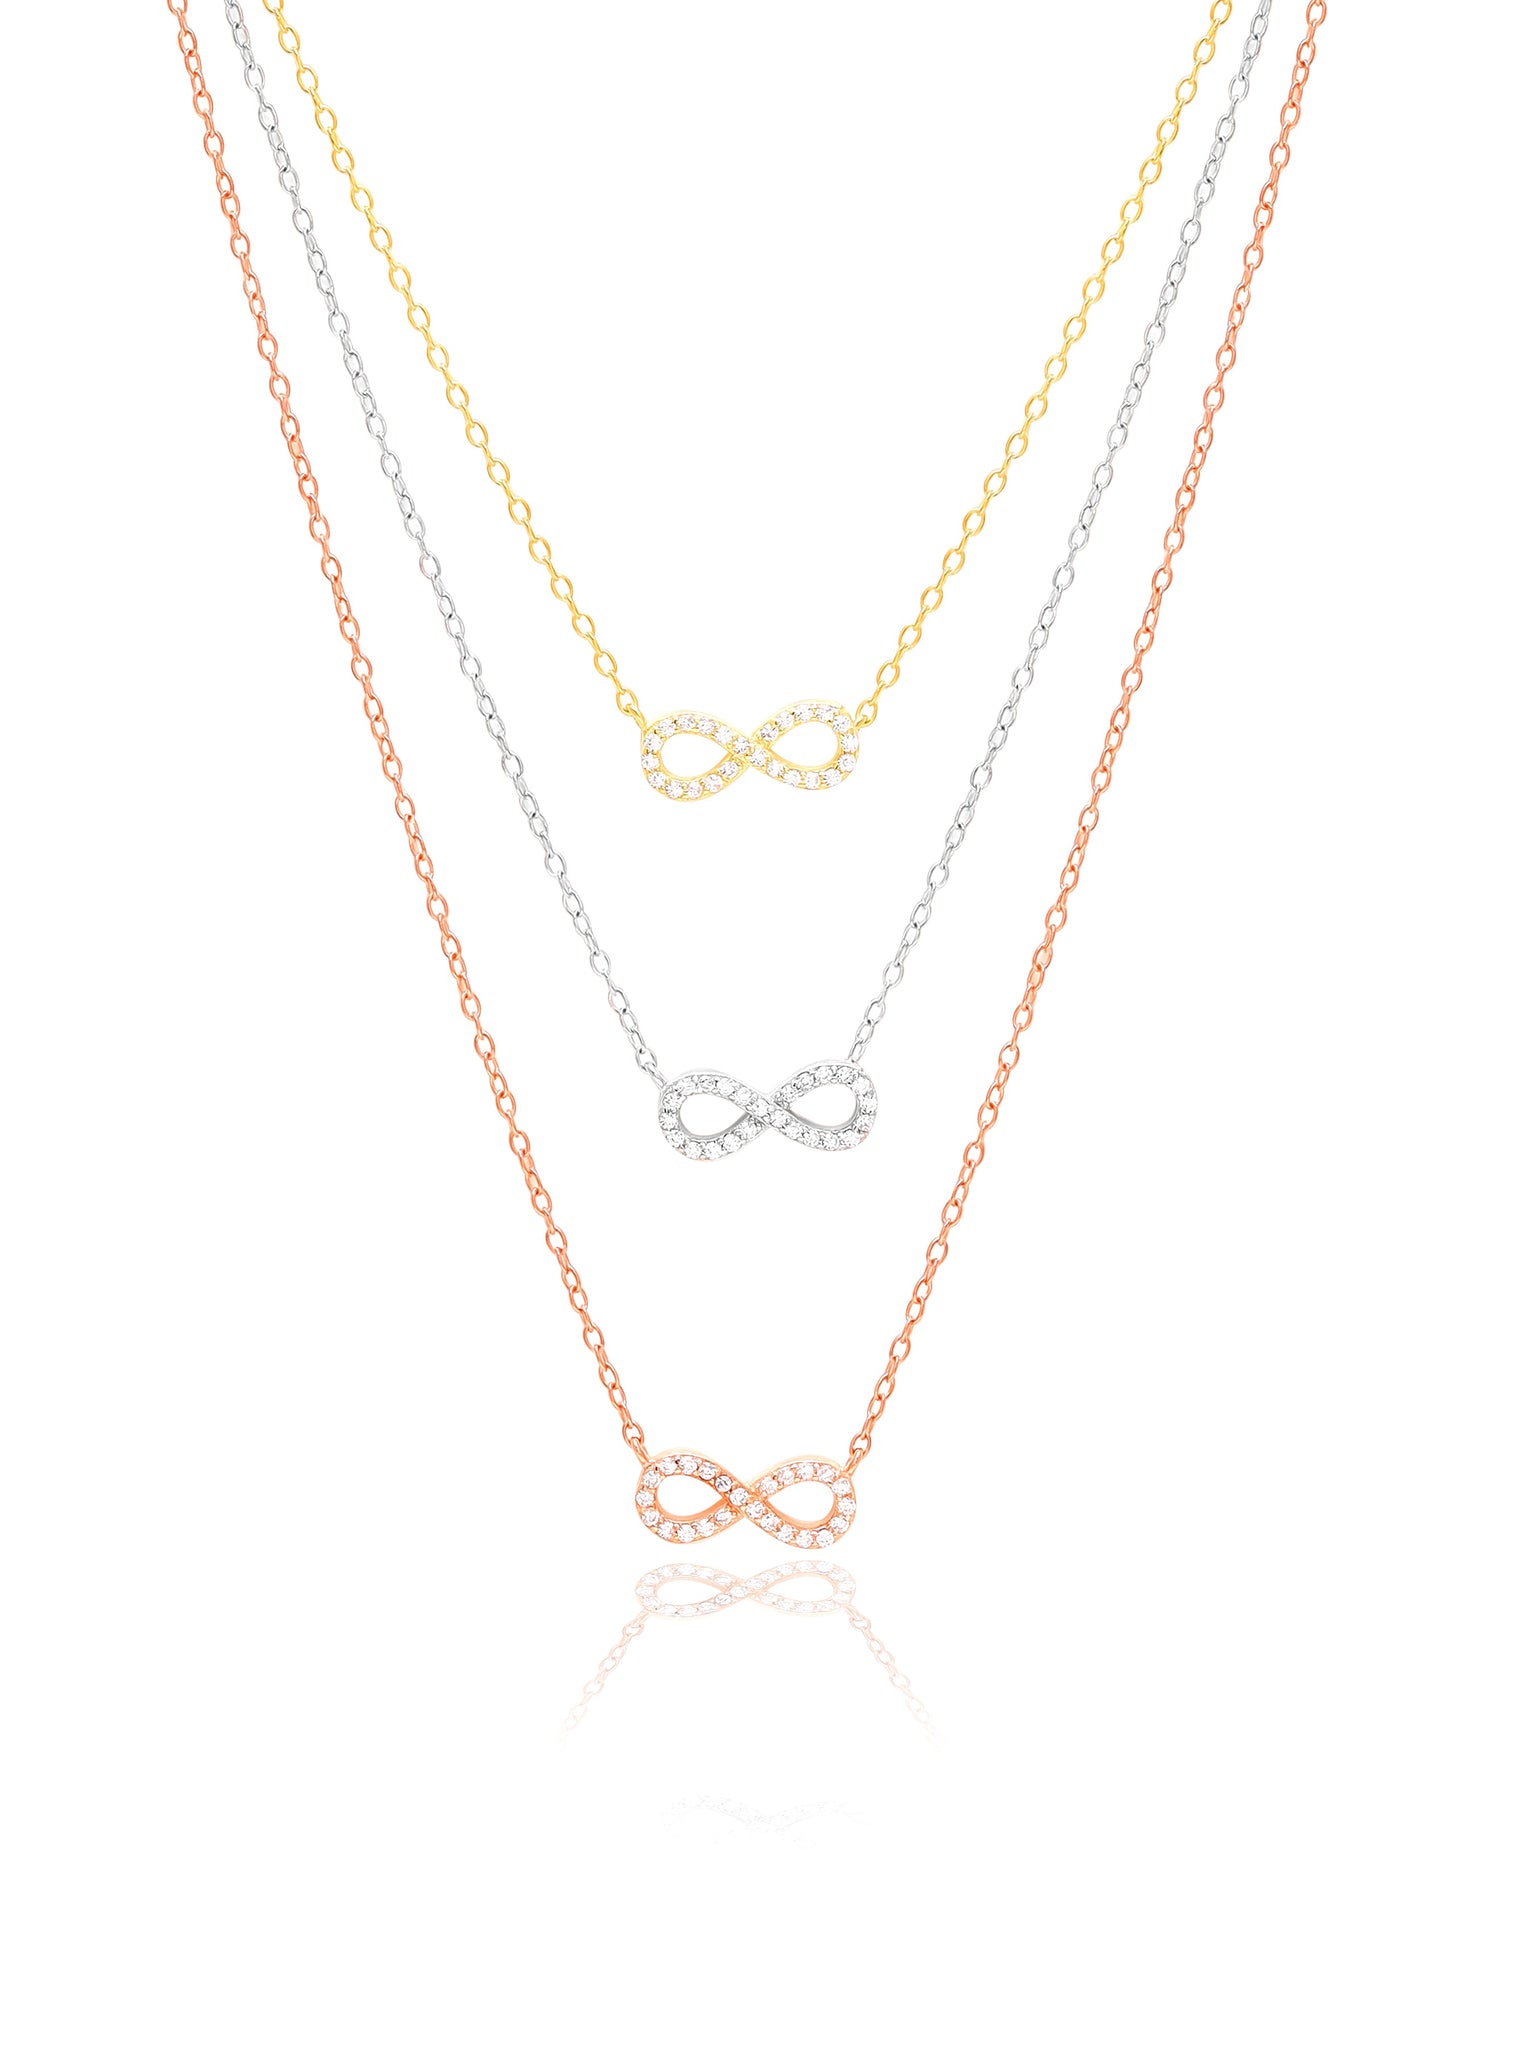 925 Silver Layers Of Infinity Chain Pendant Necklace 